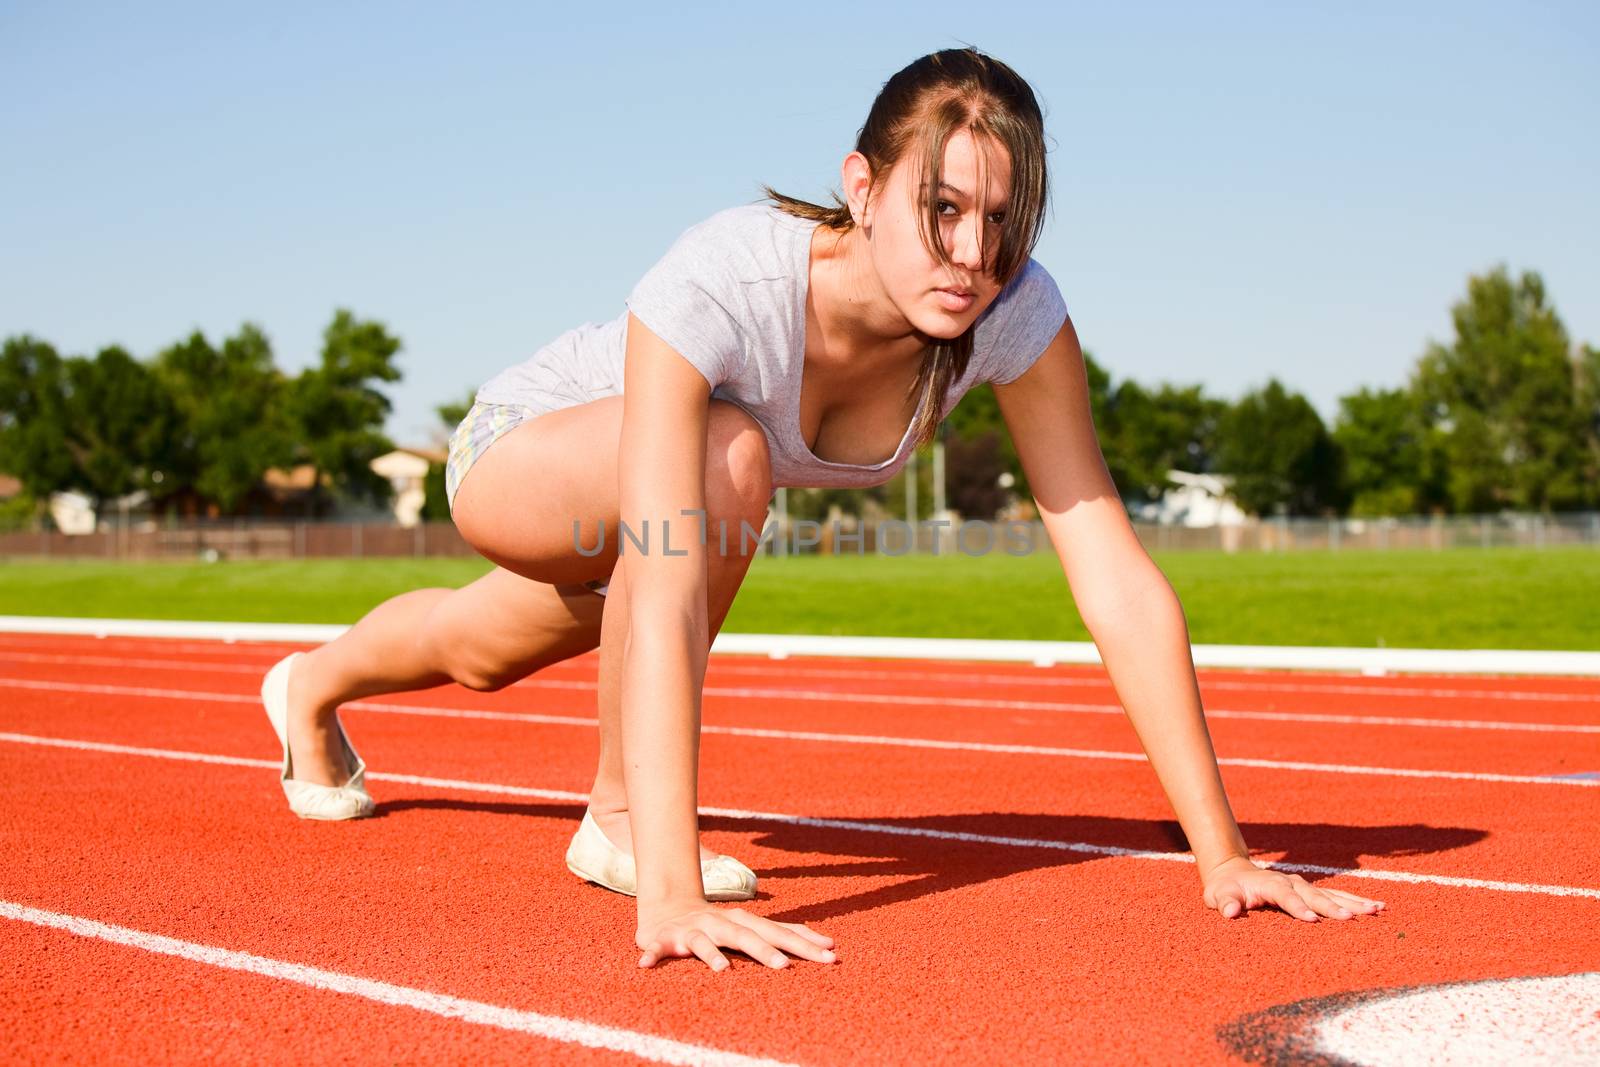 Healthy female athlete ready to race.